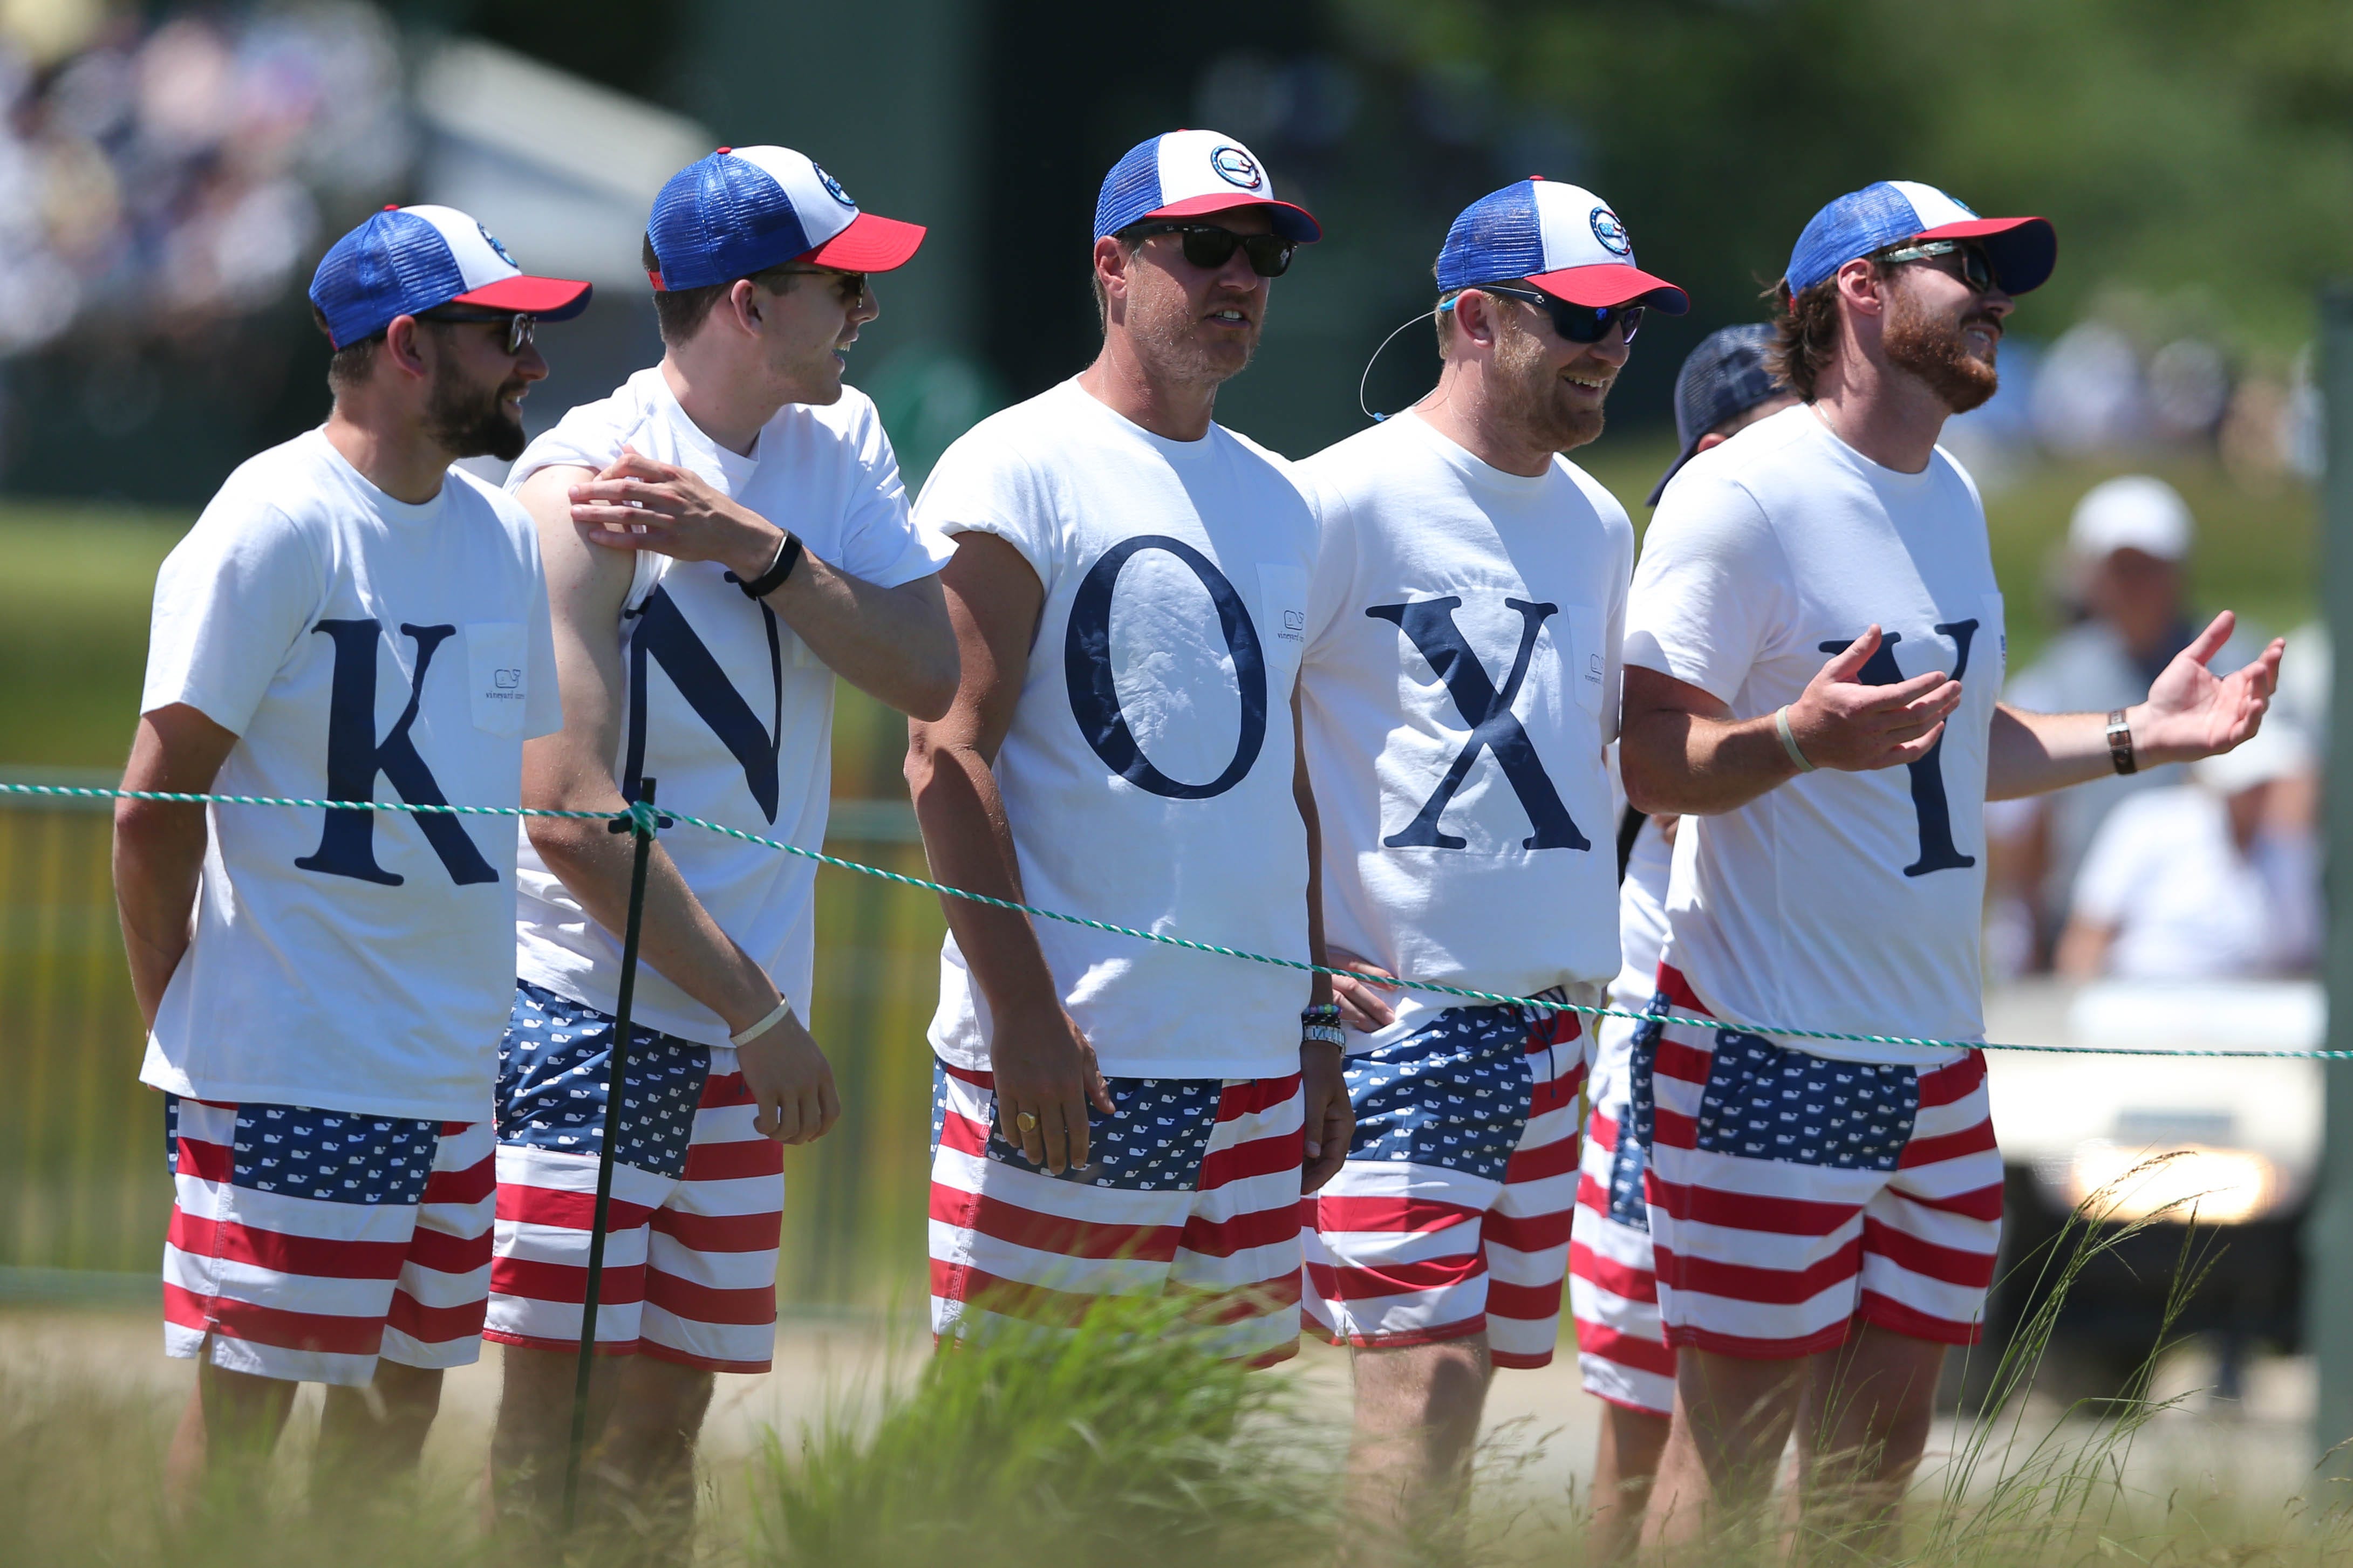 Fans of Russell Knox wear coordinated outfits during the first round of the U.S. Open golf tournament at Shinnecock Hills GC.